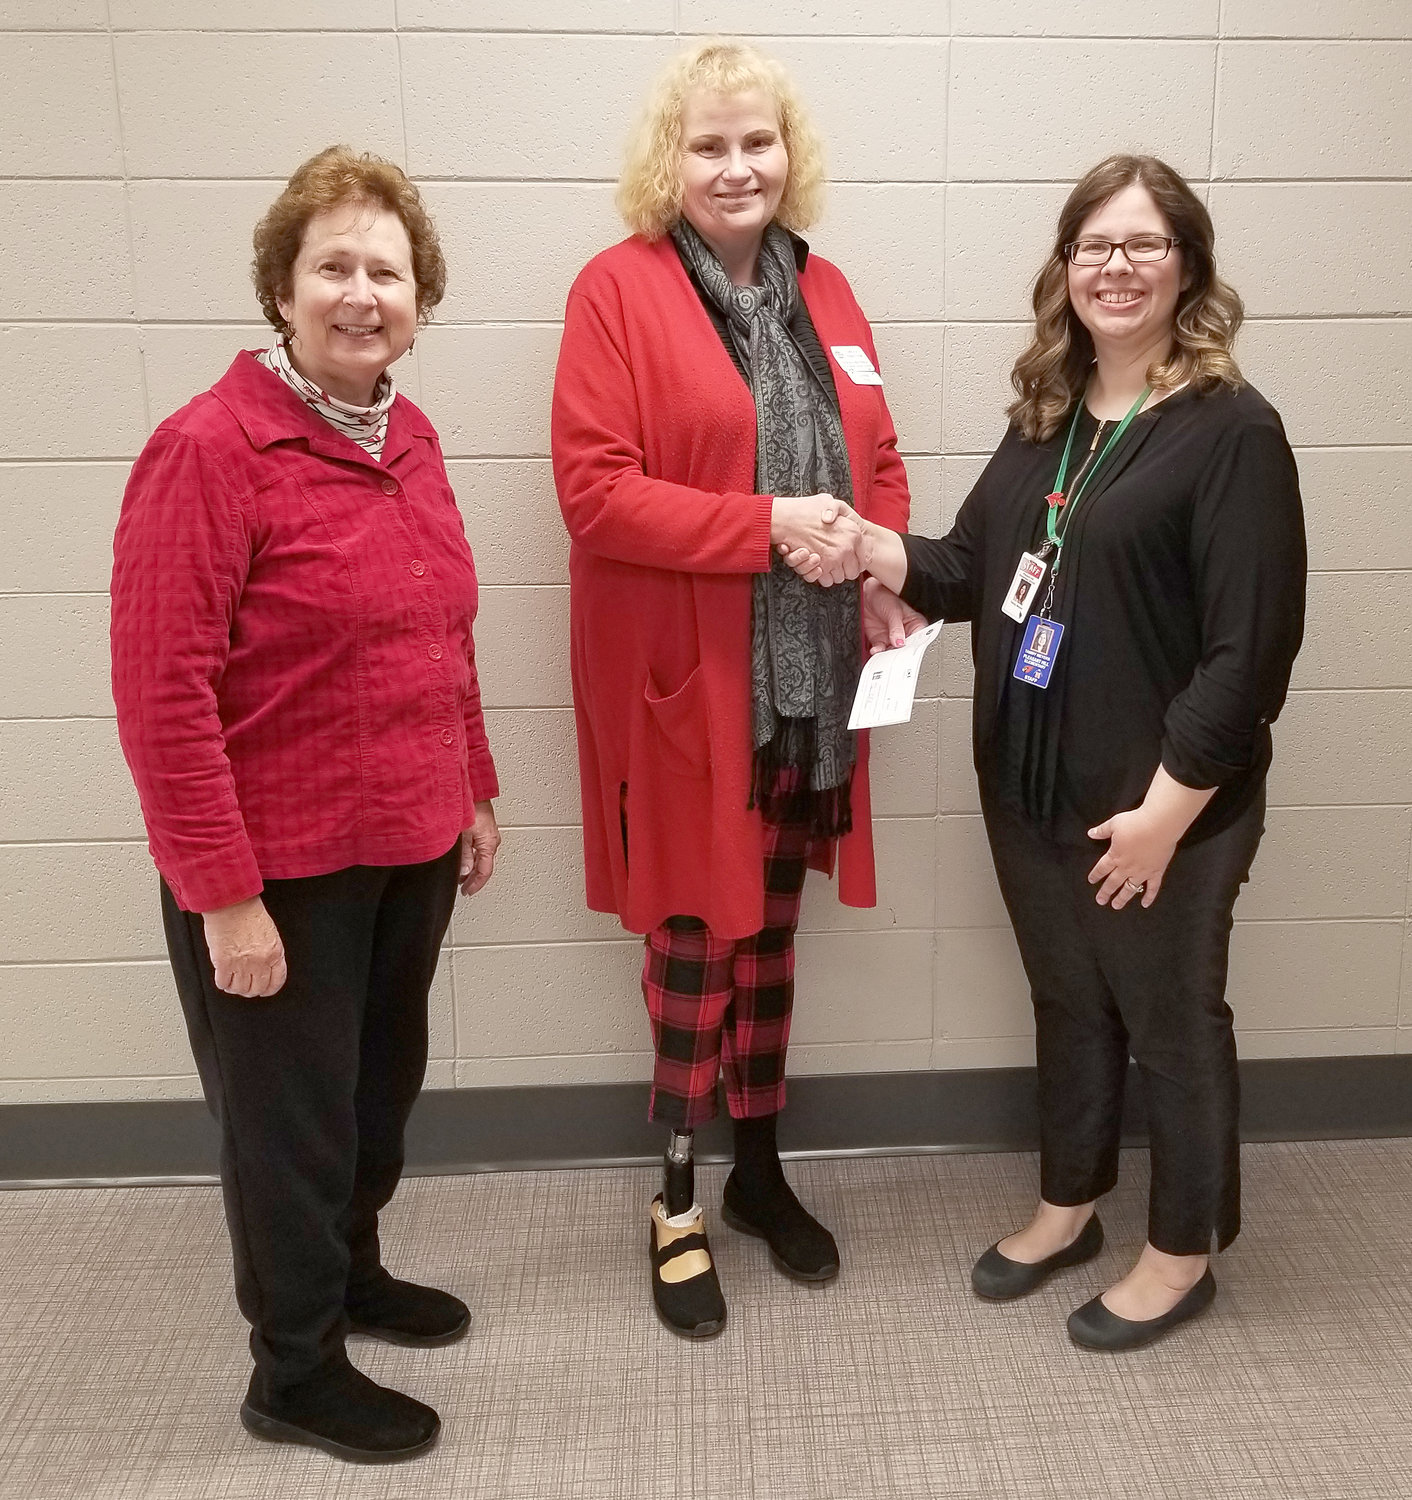 Pictured, from left, are Montgomery County Retired Teacher President Marilyn Spear, Area 4 Director Lynne Cox and Tammy Meyers. Principal Jennifer Merseley was unavailable at the time of picture.